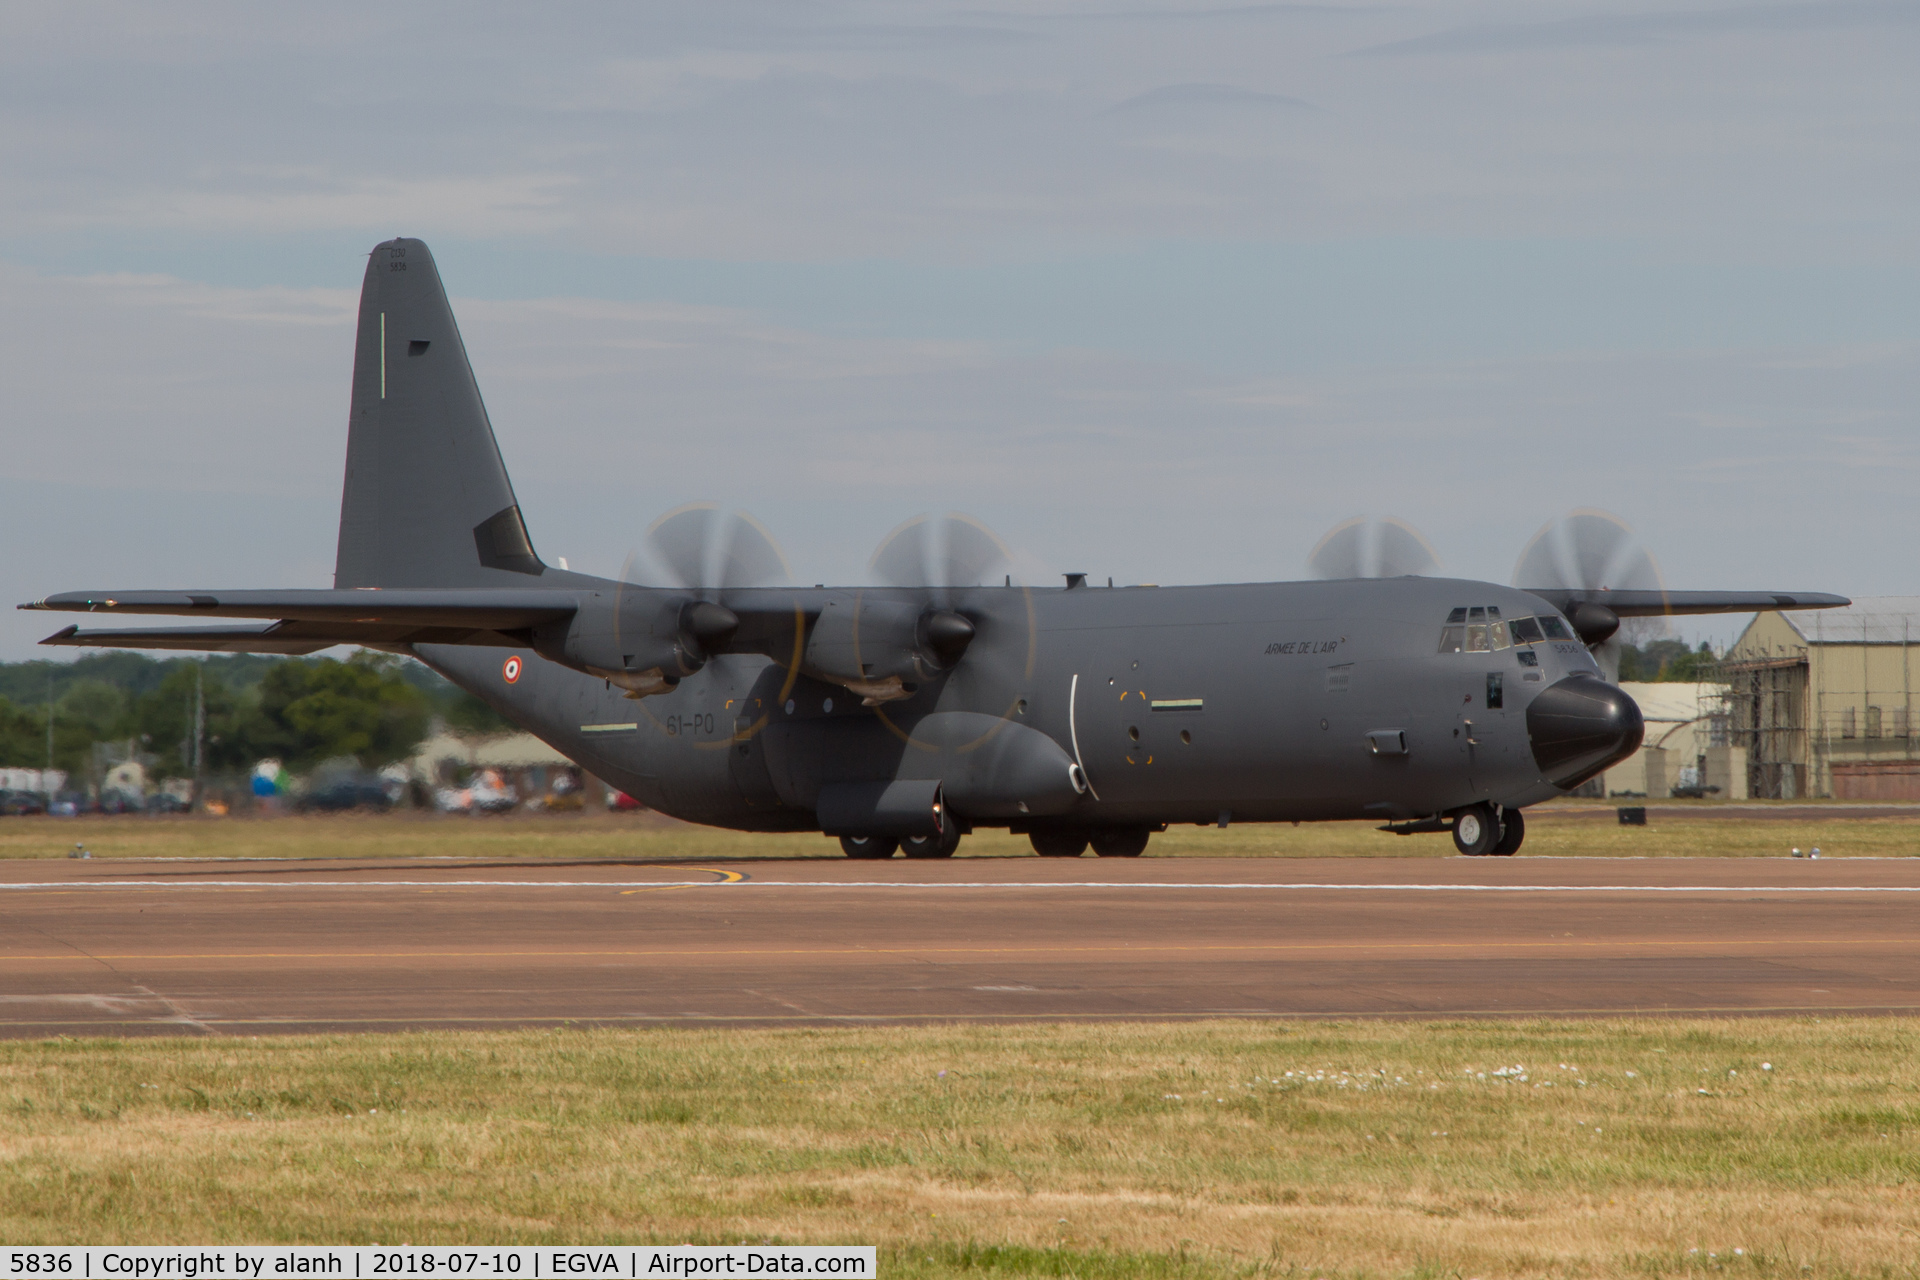 5836, 2017 Lockheed Martin C-130J-30 Hercules C/N 382-5836, Arriving at RIAT 2018, support aircraft for Rafales